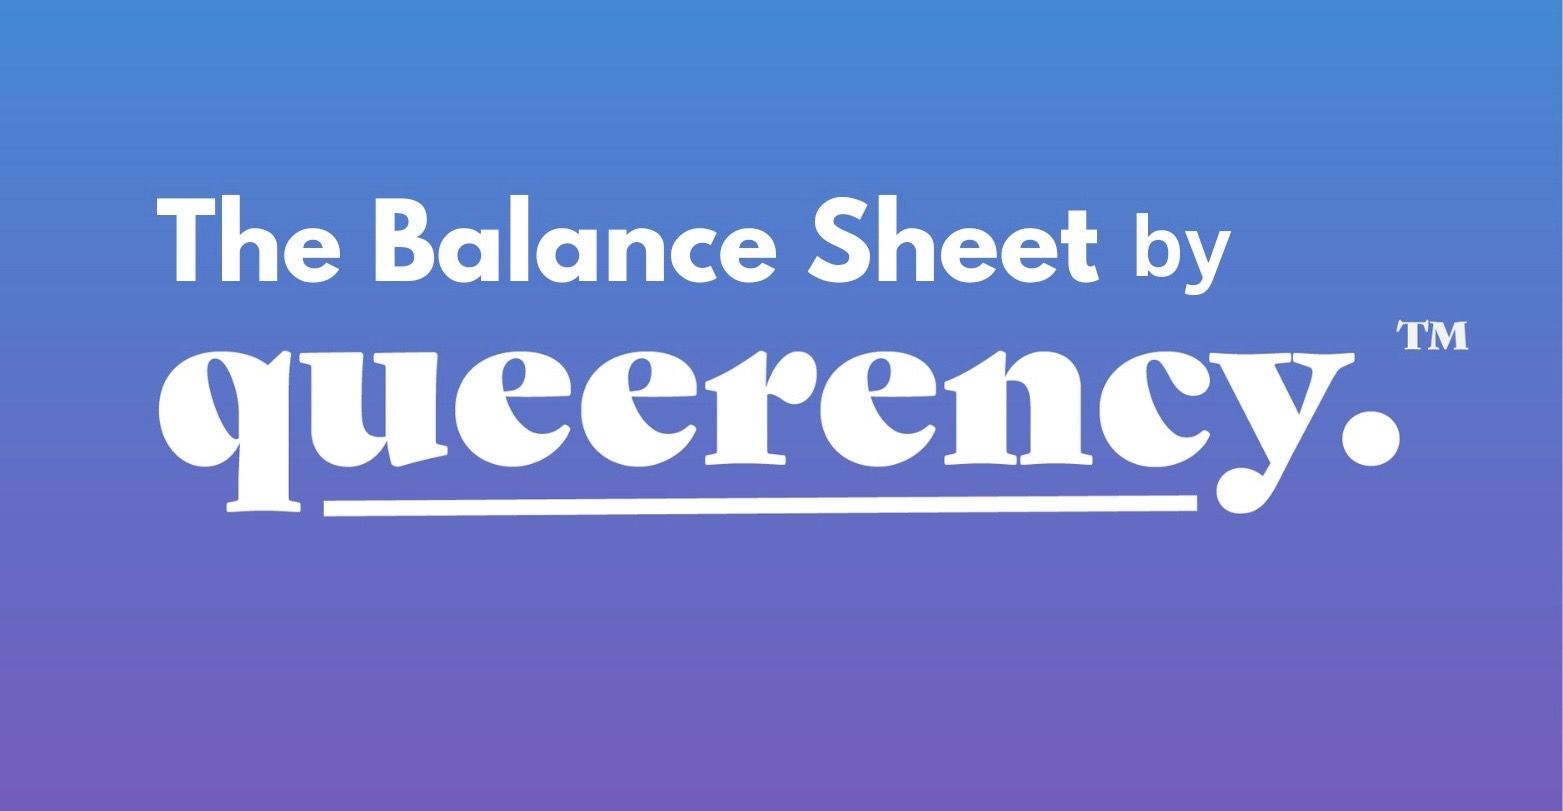 Introducing The Balance Sheet by Queerency!